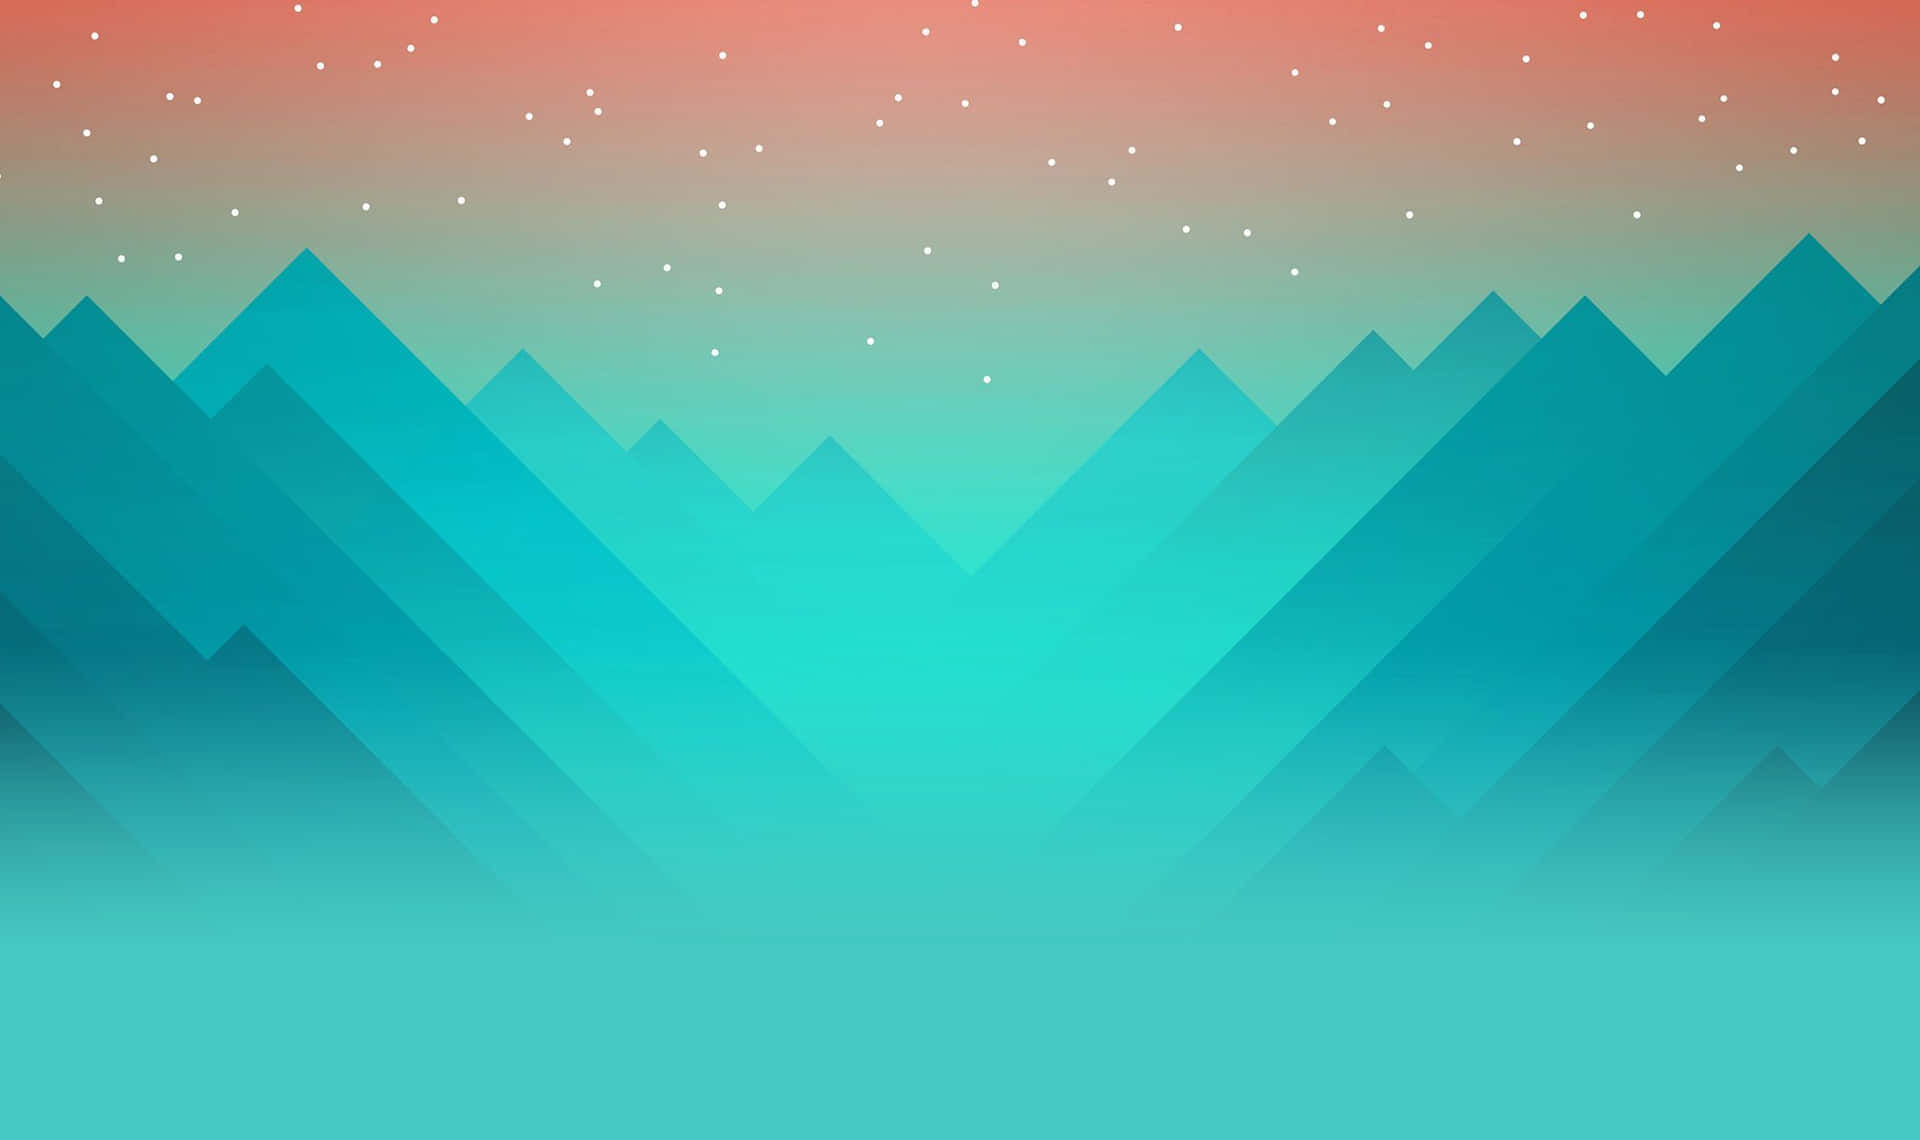 Serenity Peaks Abstract Landscape Wallpaper